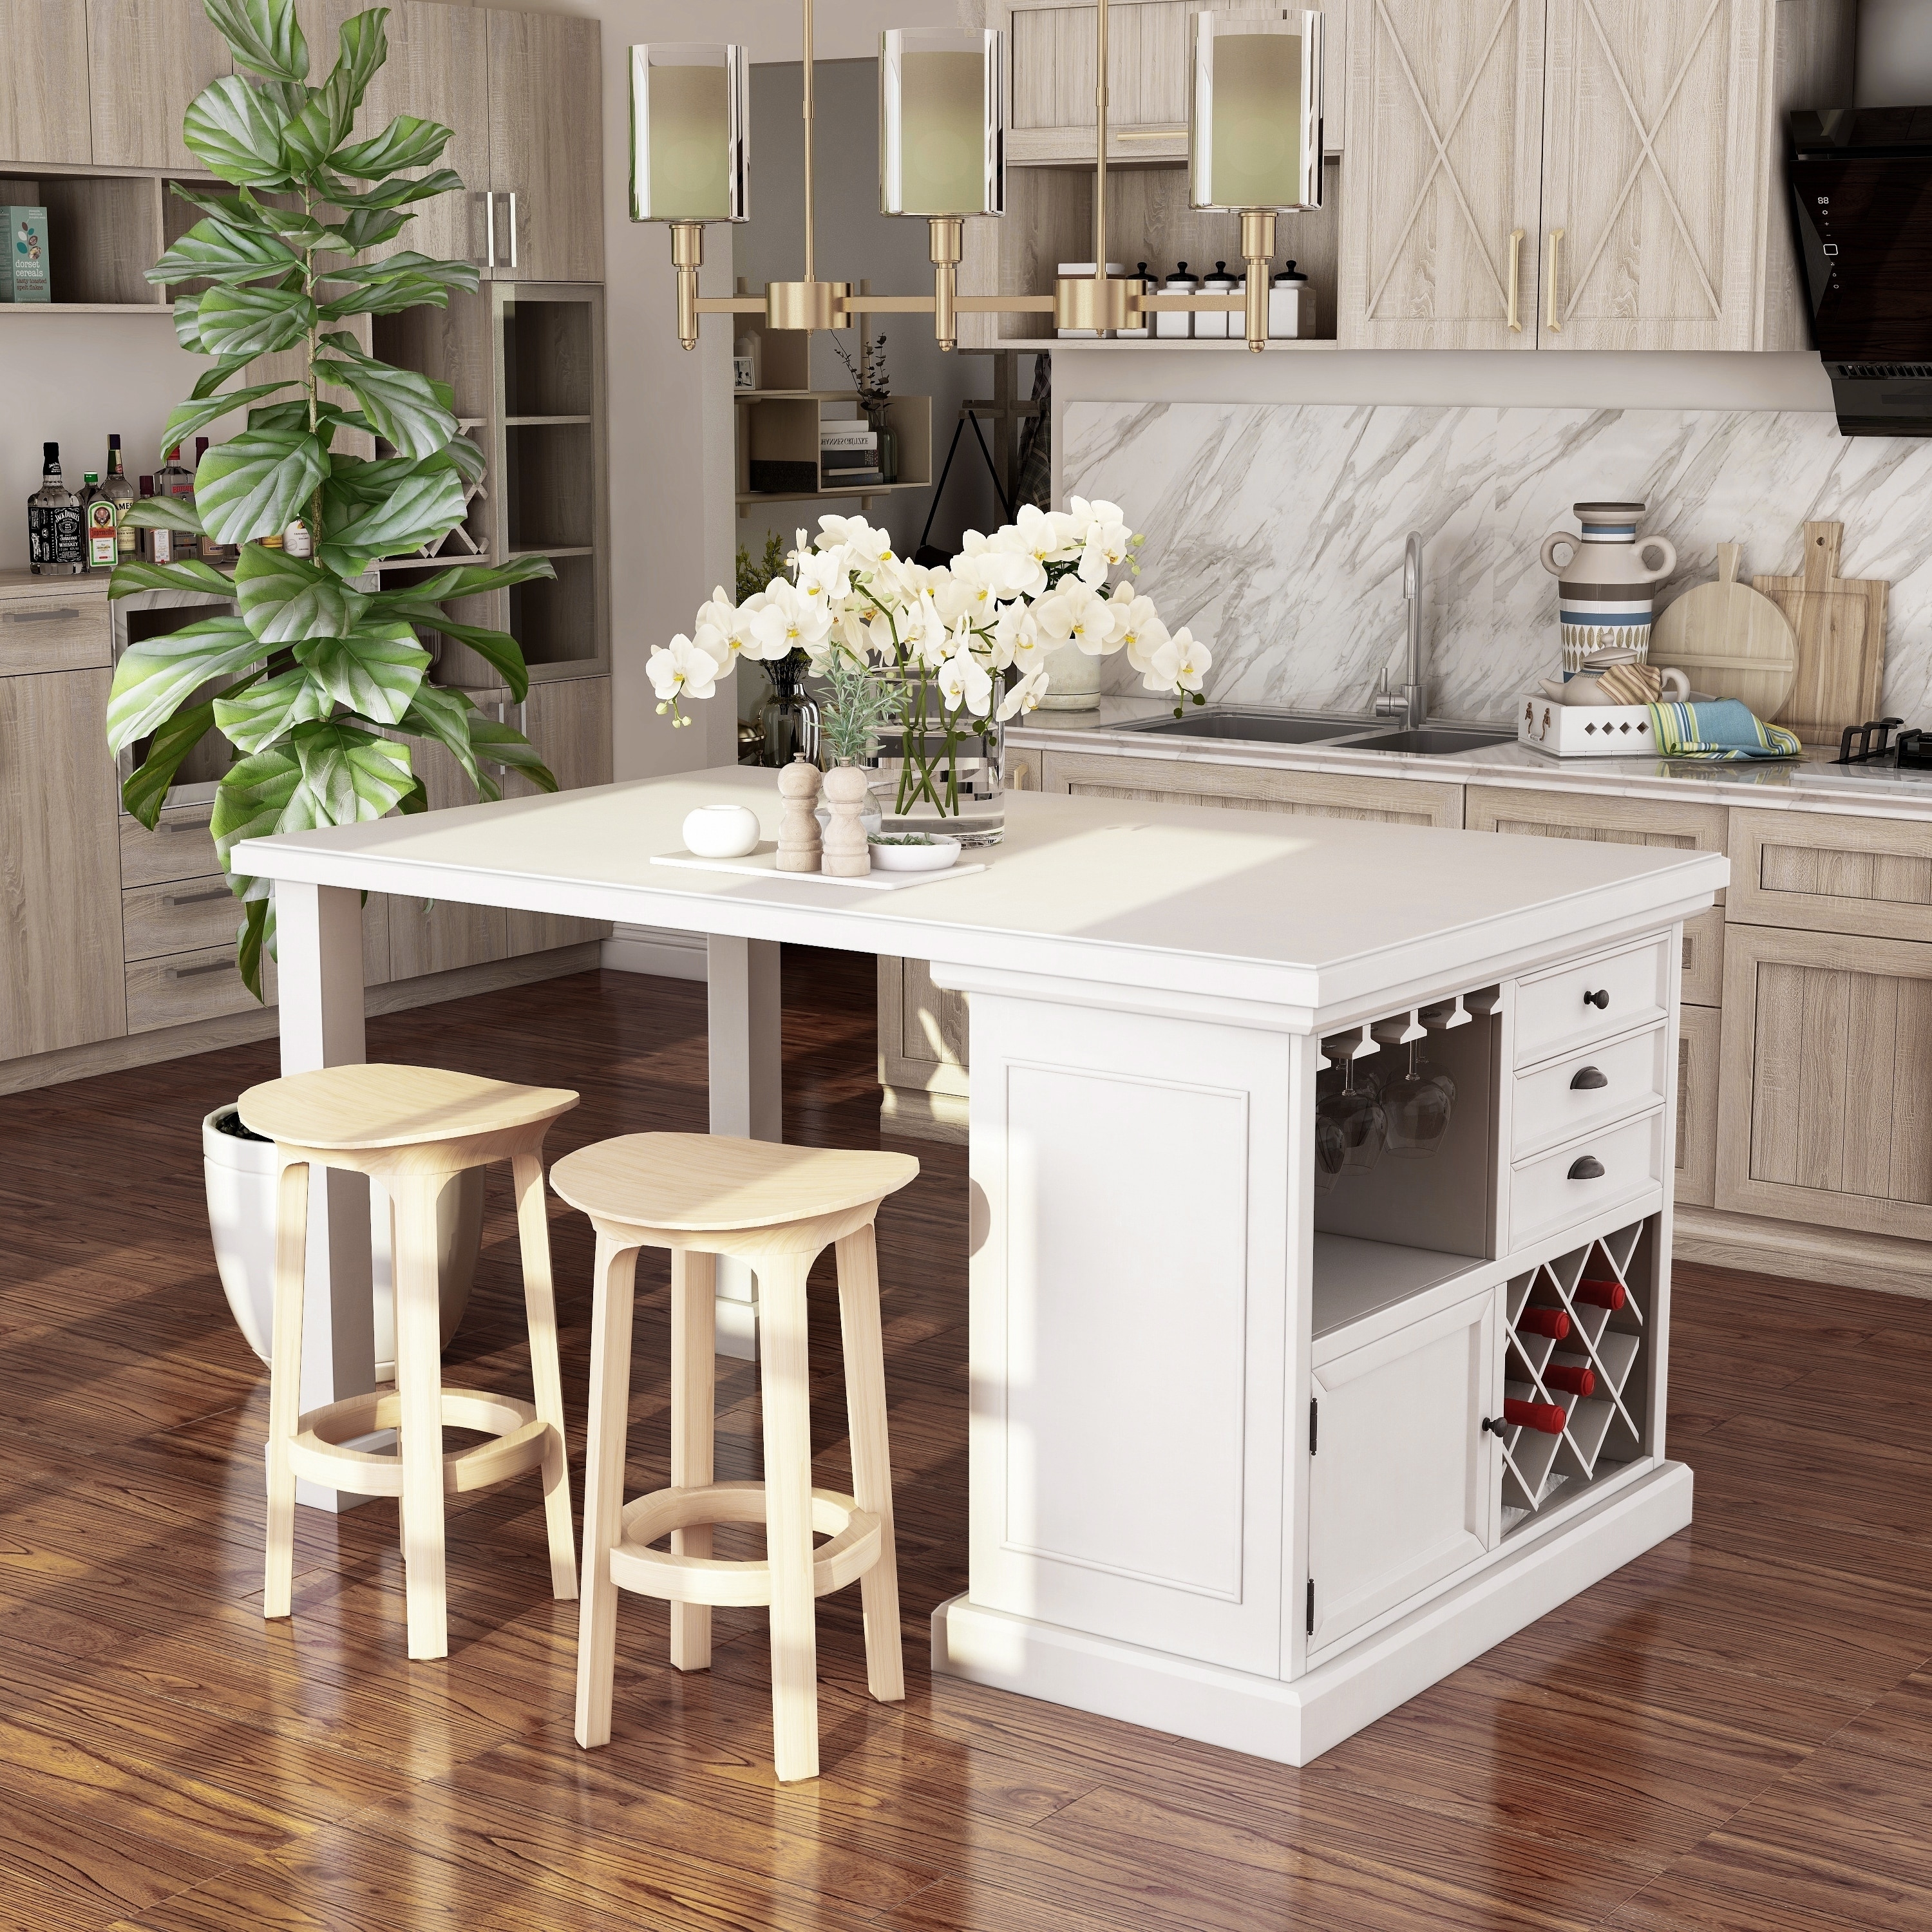 Furniture Of America Tia Transitional White 66 Inch Kitchen Island Overstock 20331449